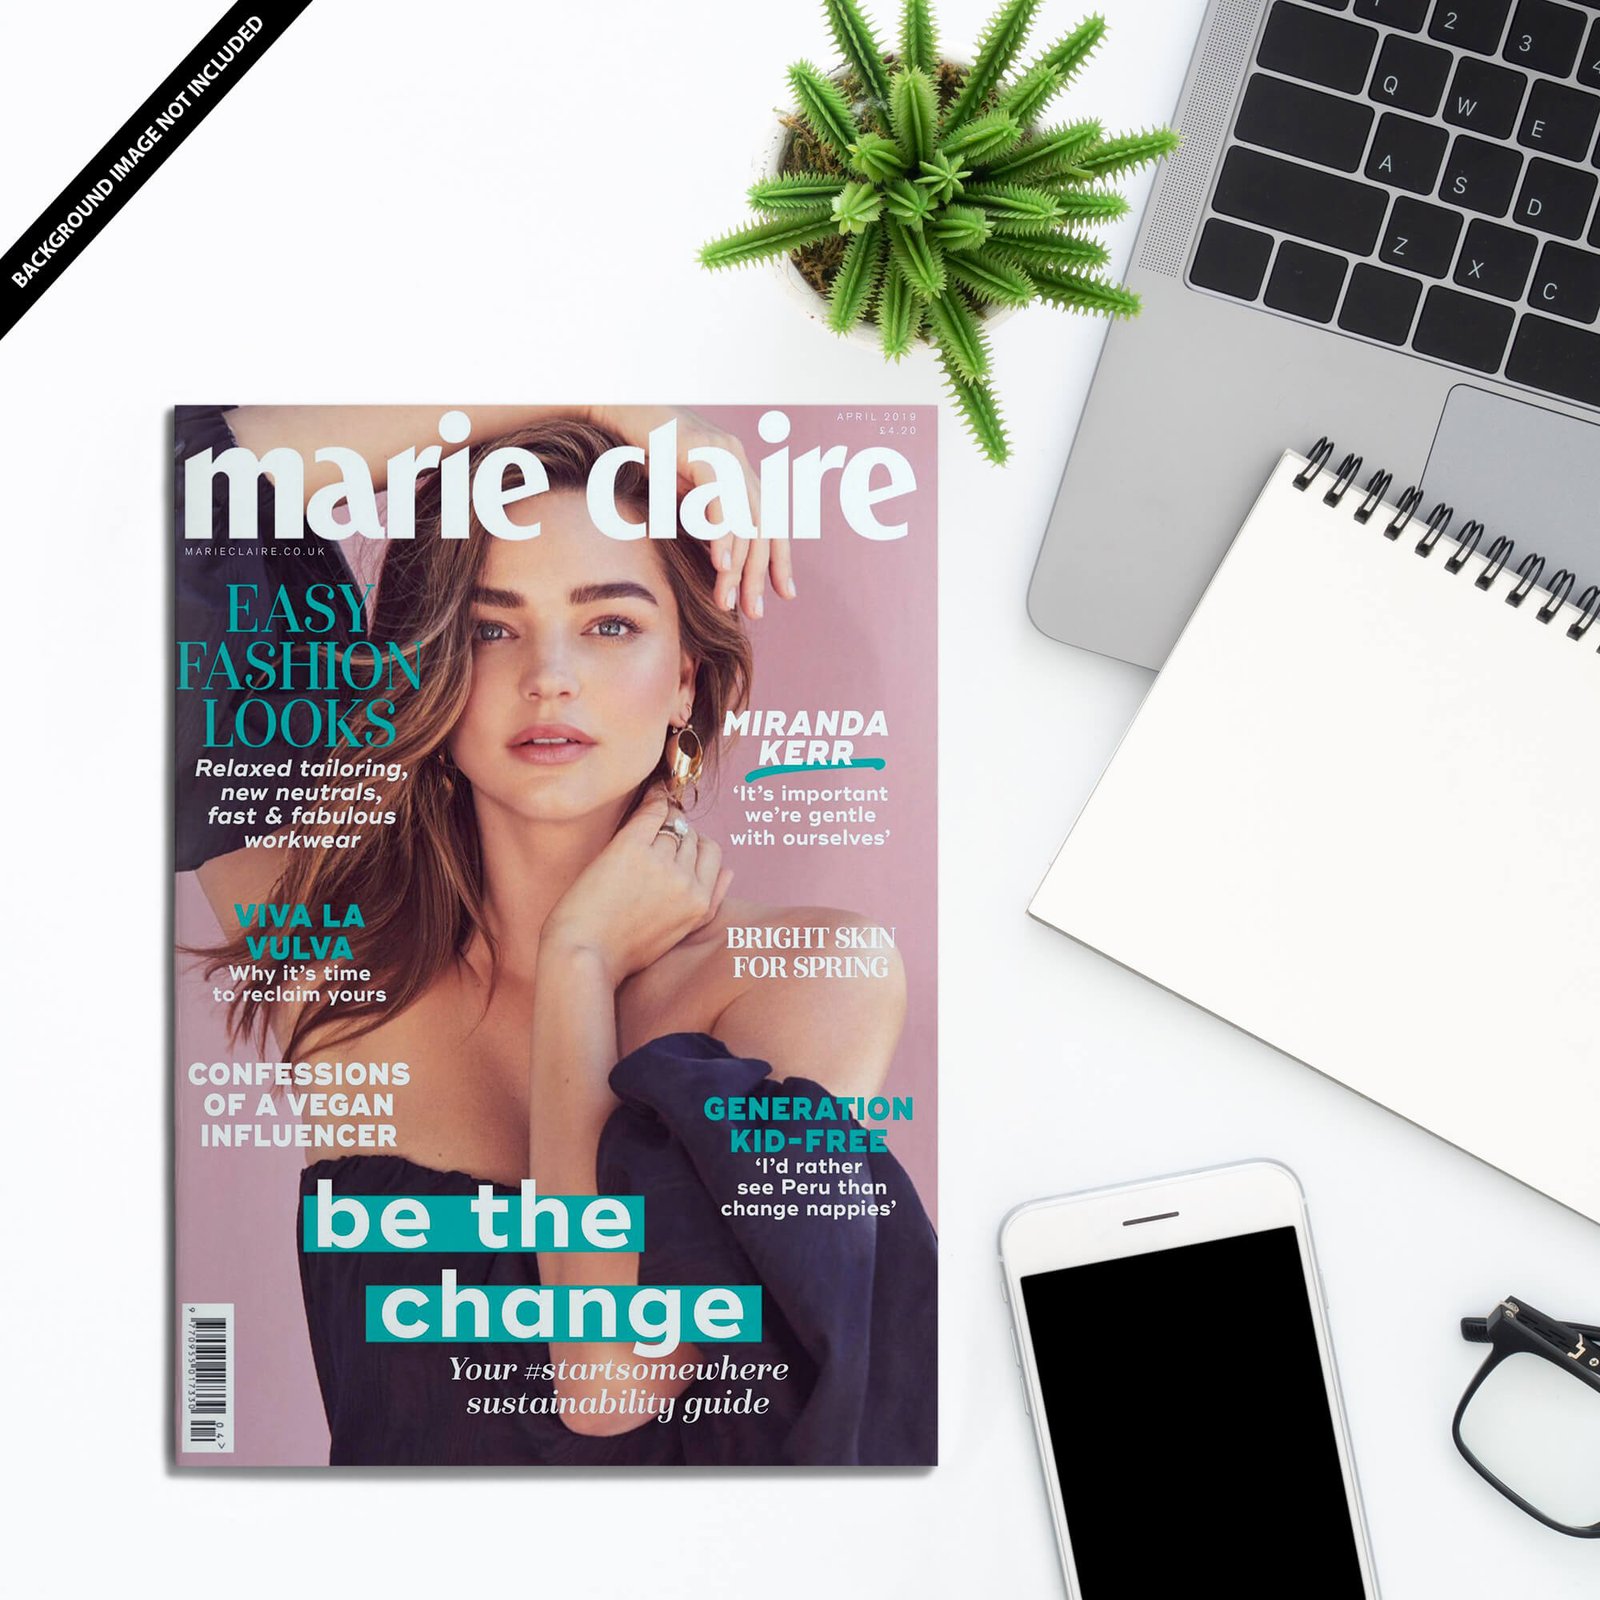 Free Cover Magazine Mockup PSD Template